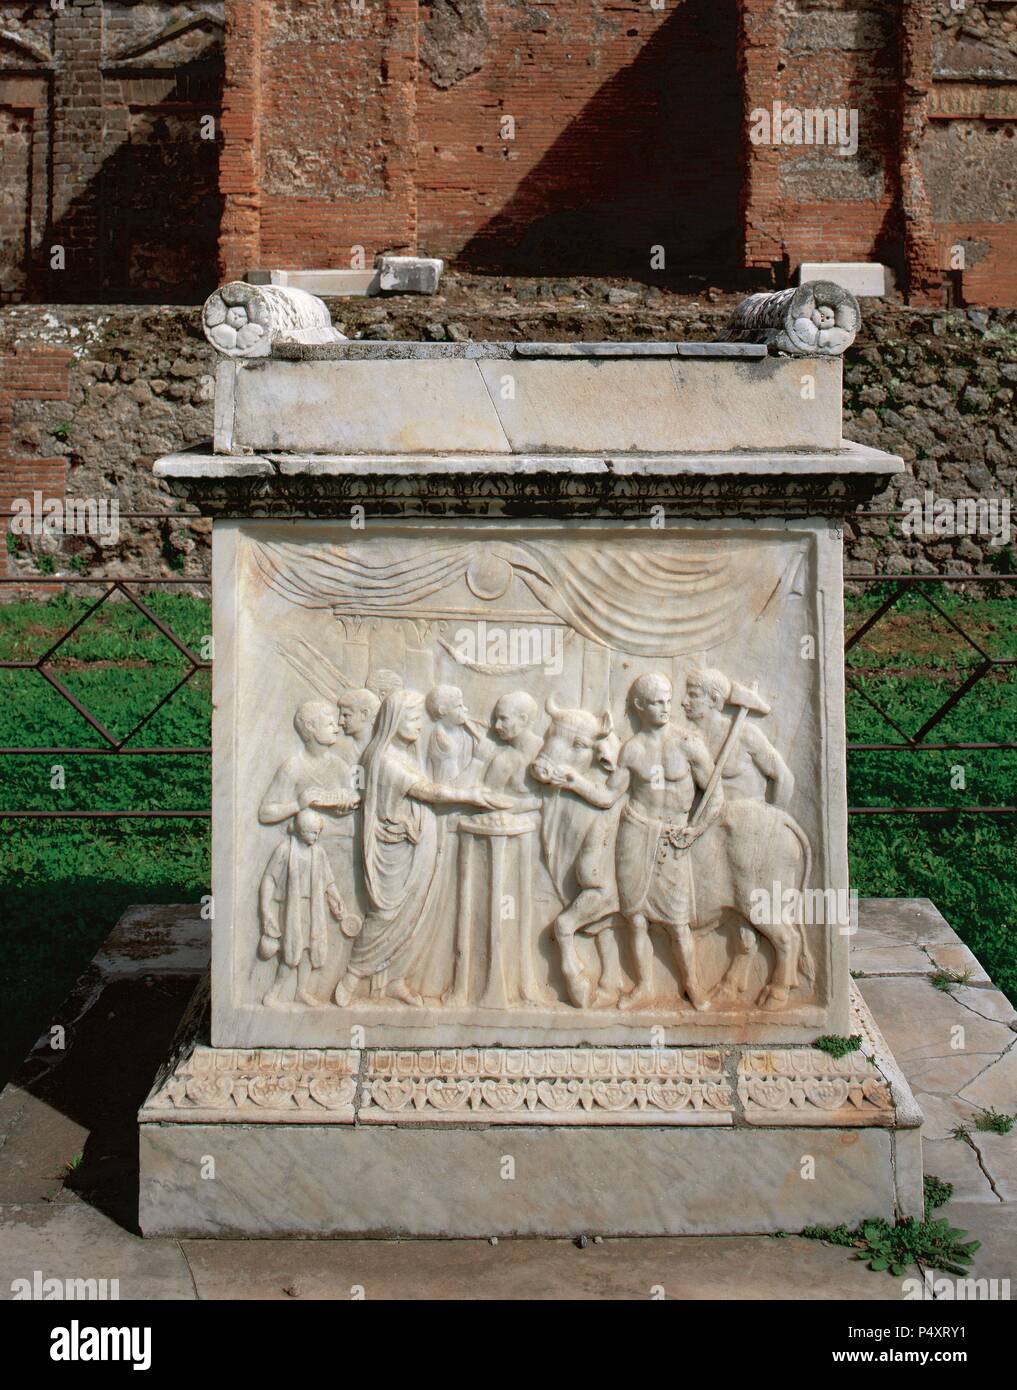 Roman Art. Pompeii. Altar of Vespasian, Temple of Vespasian (69-79 CE). The relief shows a sacrificial scene: the sacrificer and his aide bring the sacrificial bull, while the priest, a veil over his head, pours the libation over a tripod. Archaeological Site. Pompeii. Italy. Stock Photo